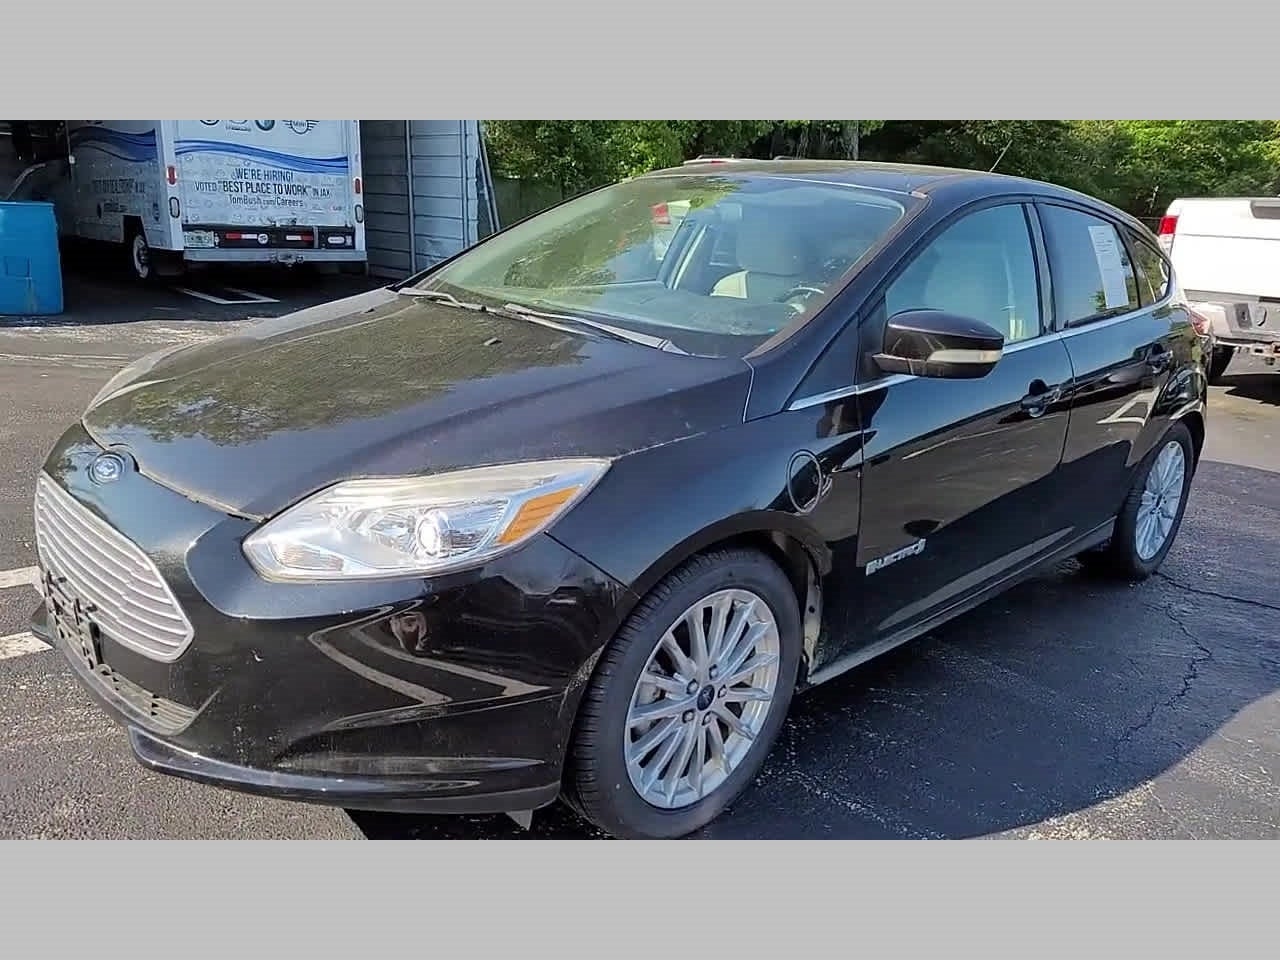 2013 Ford Focus Electric Base